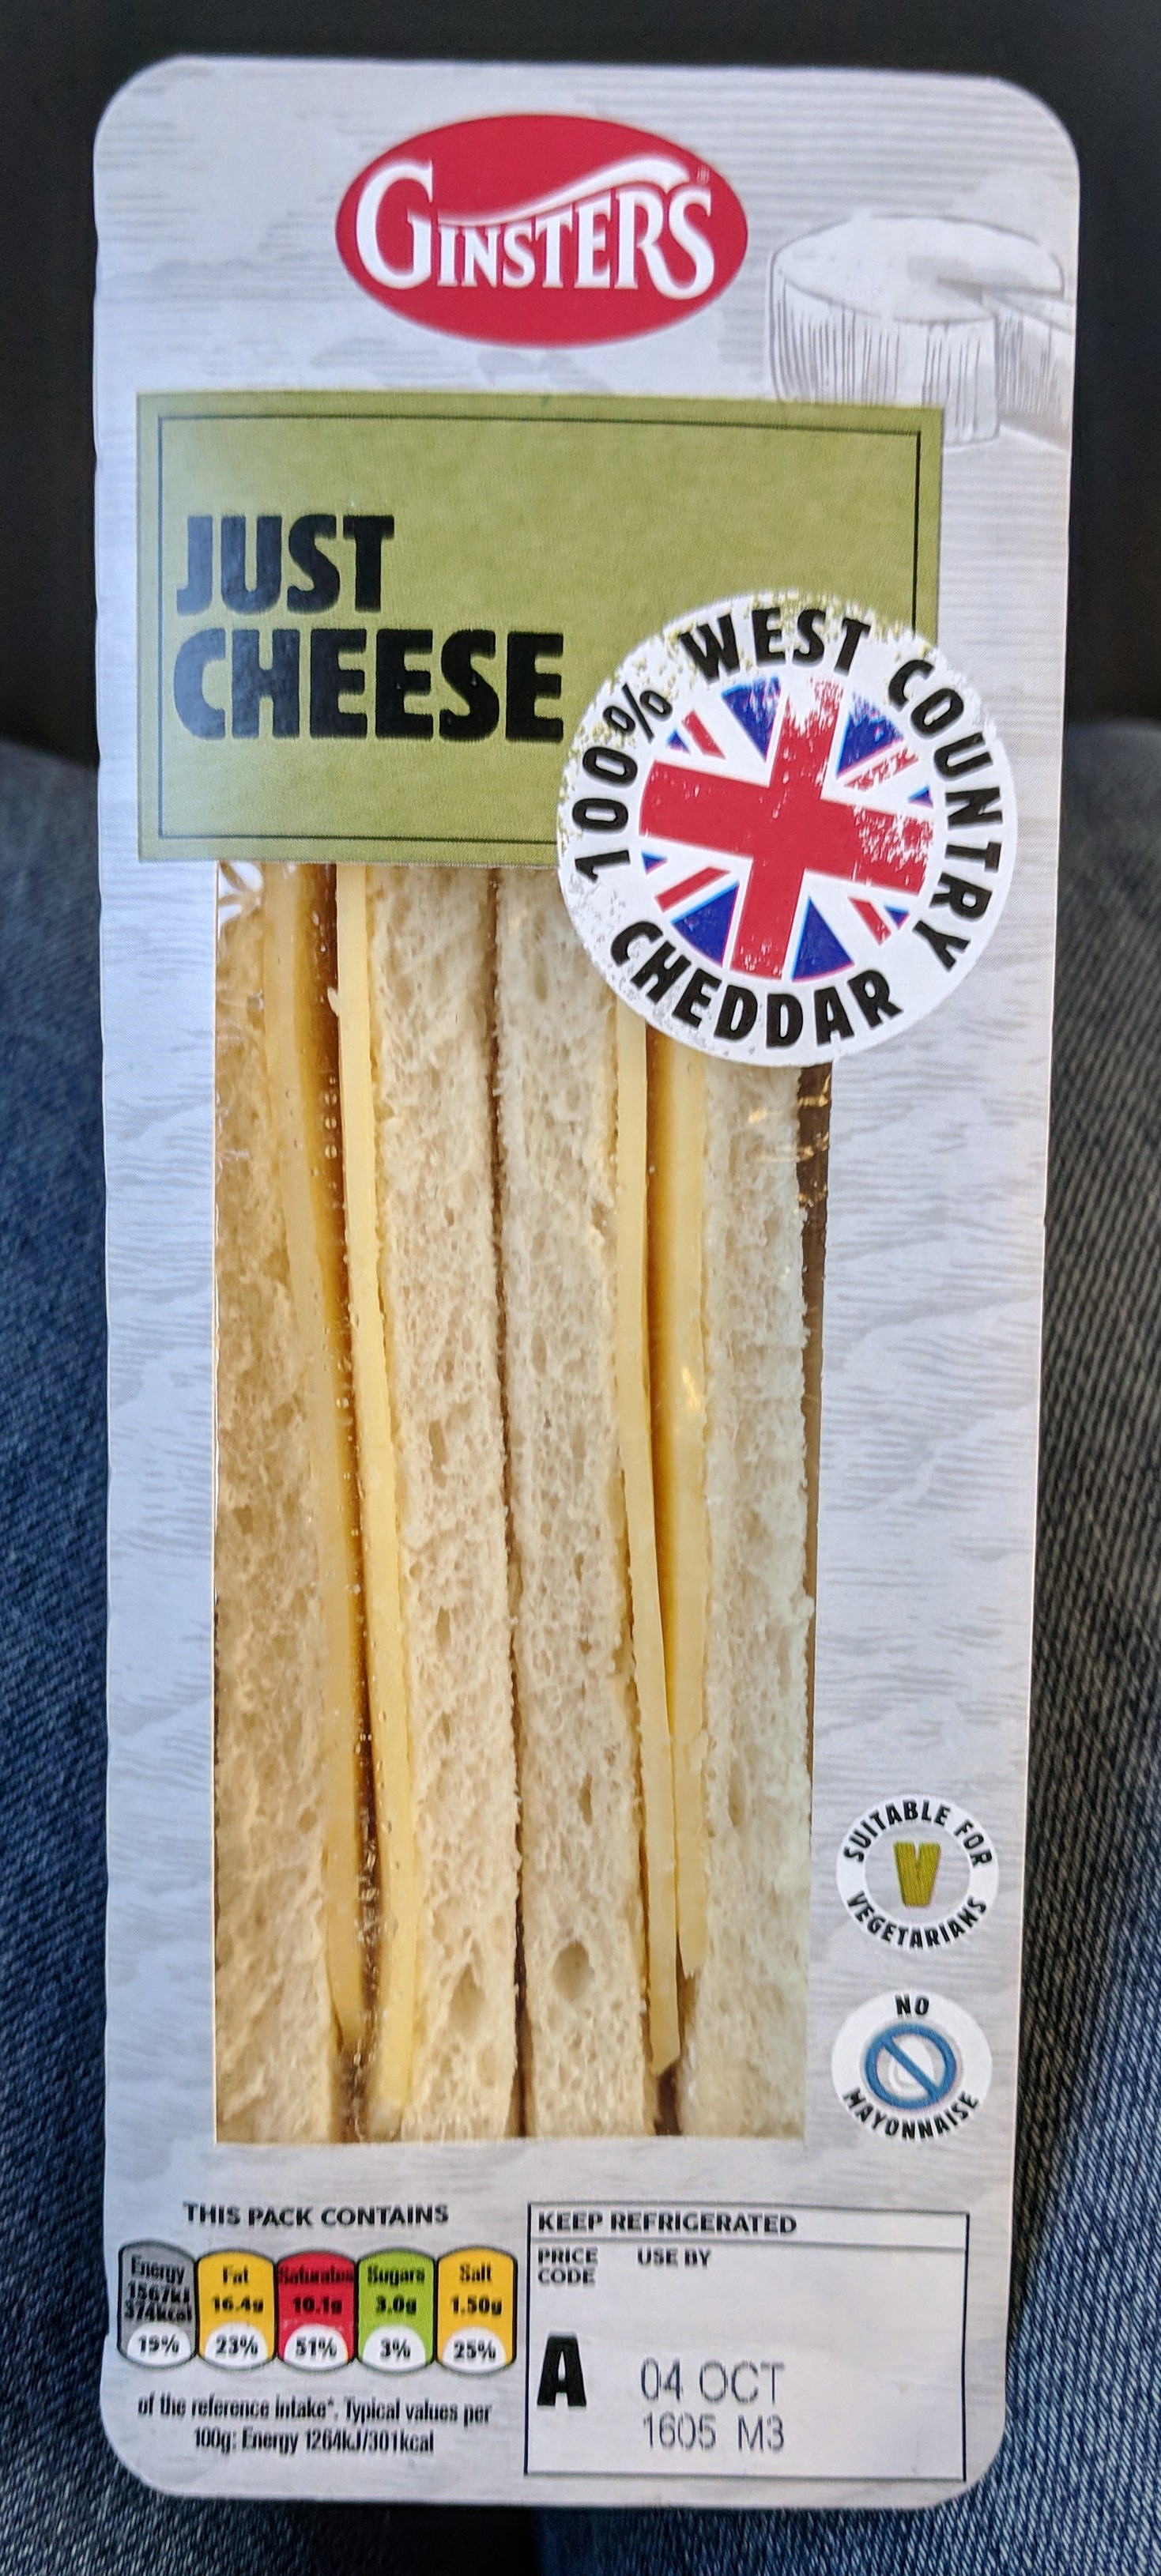 Ginsters Just Cheese Sandwich